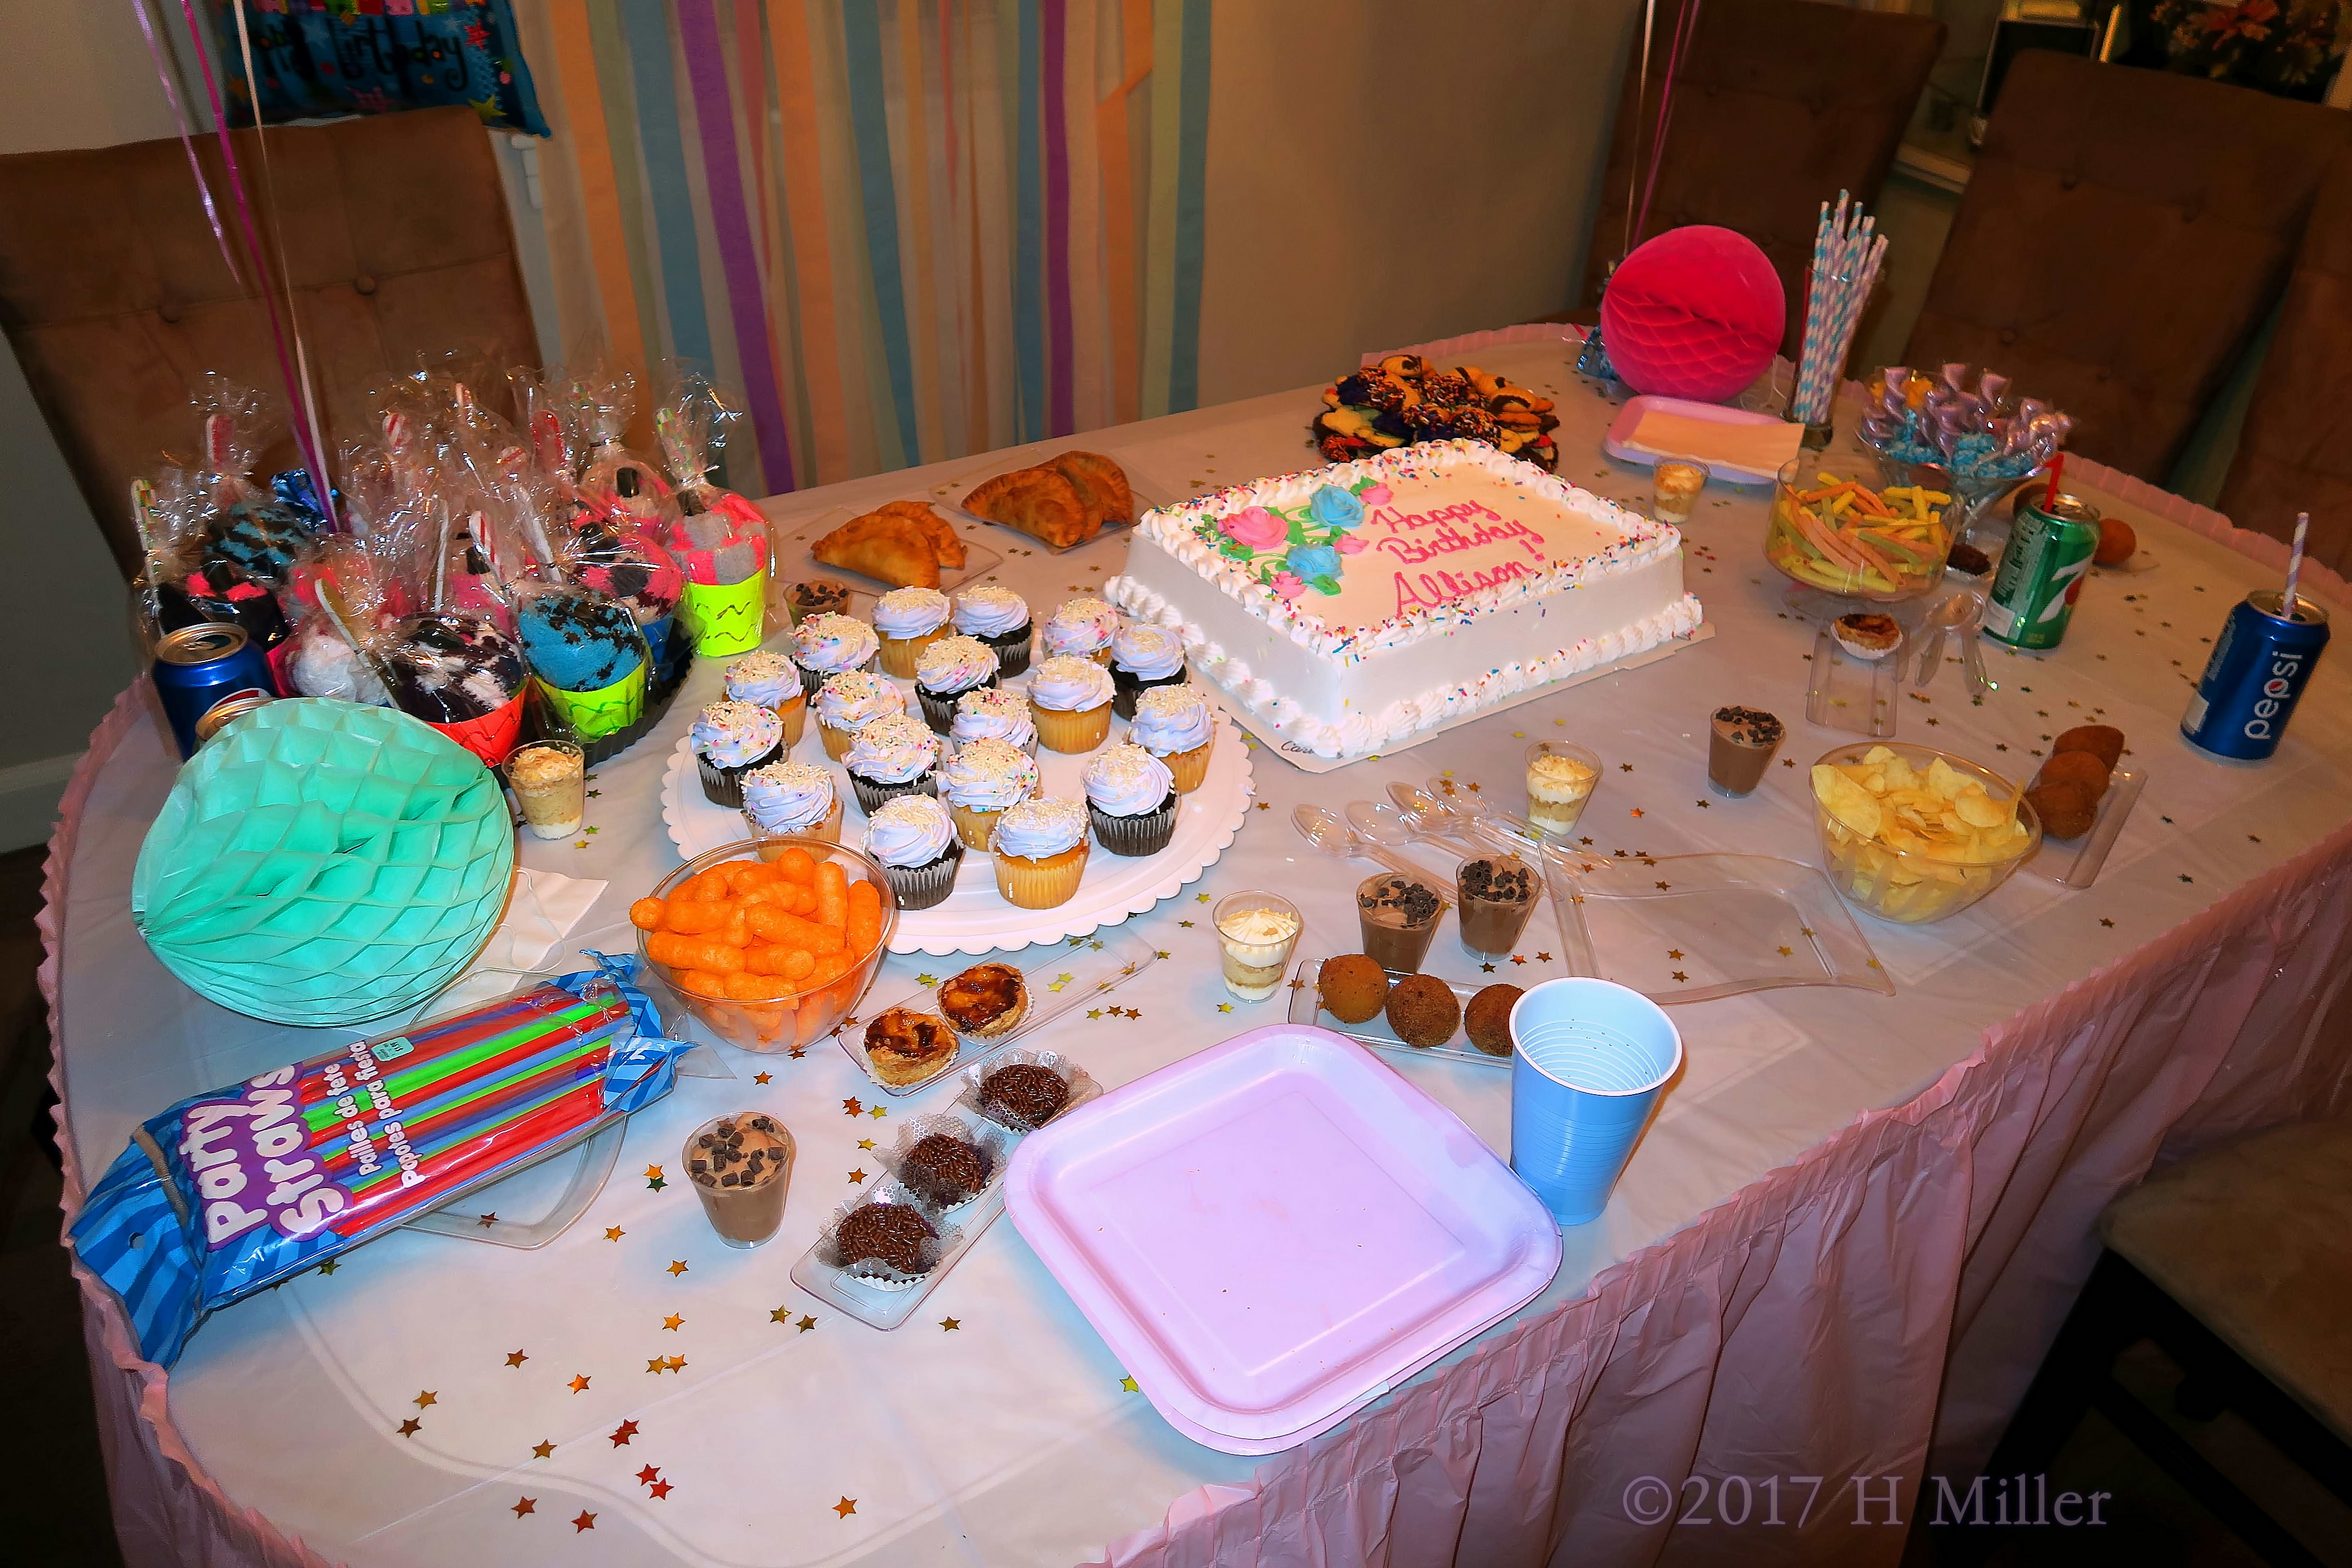 The Cake And Treats Table. 